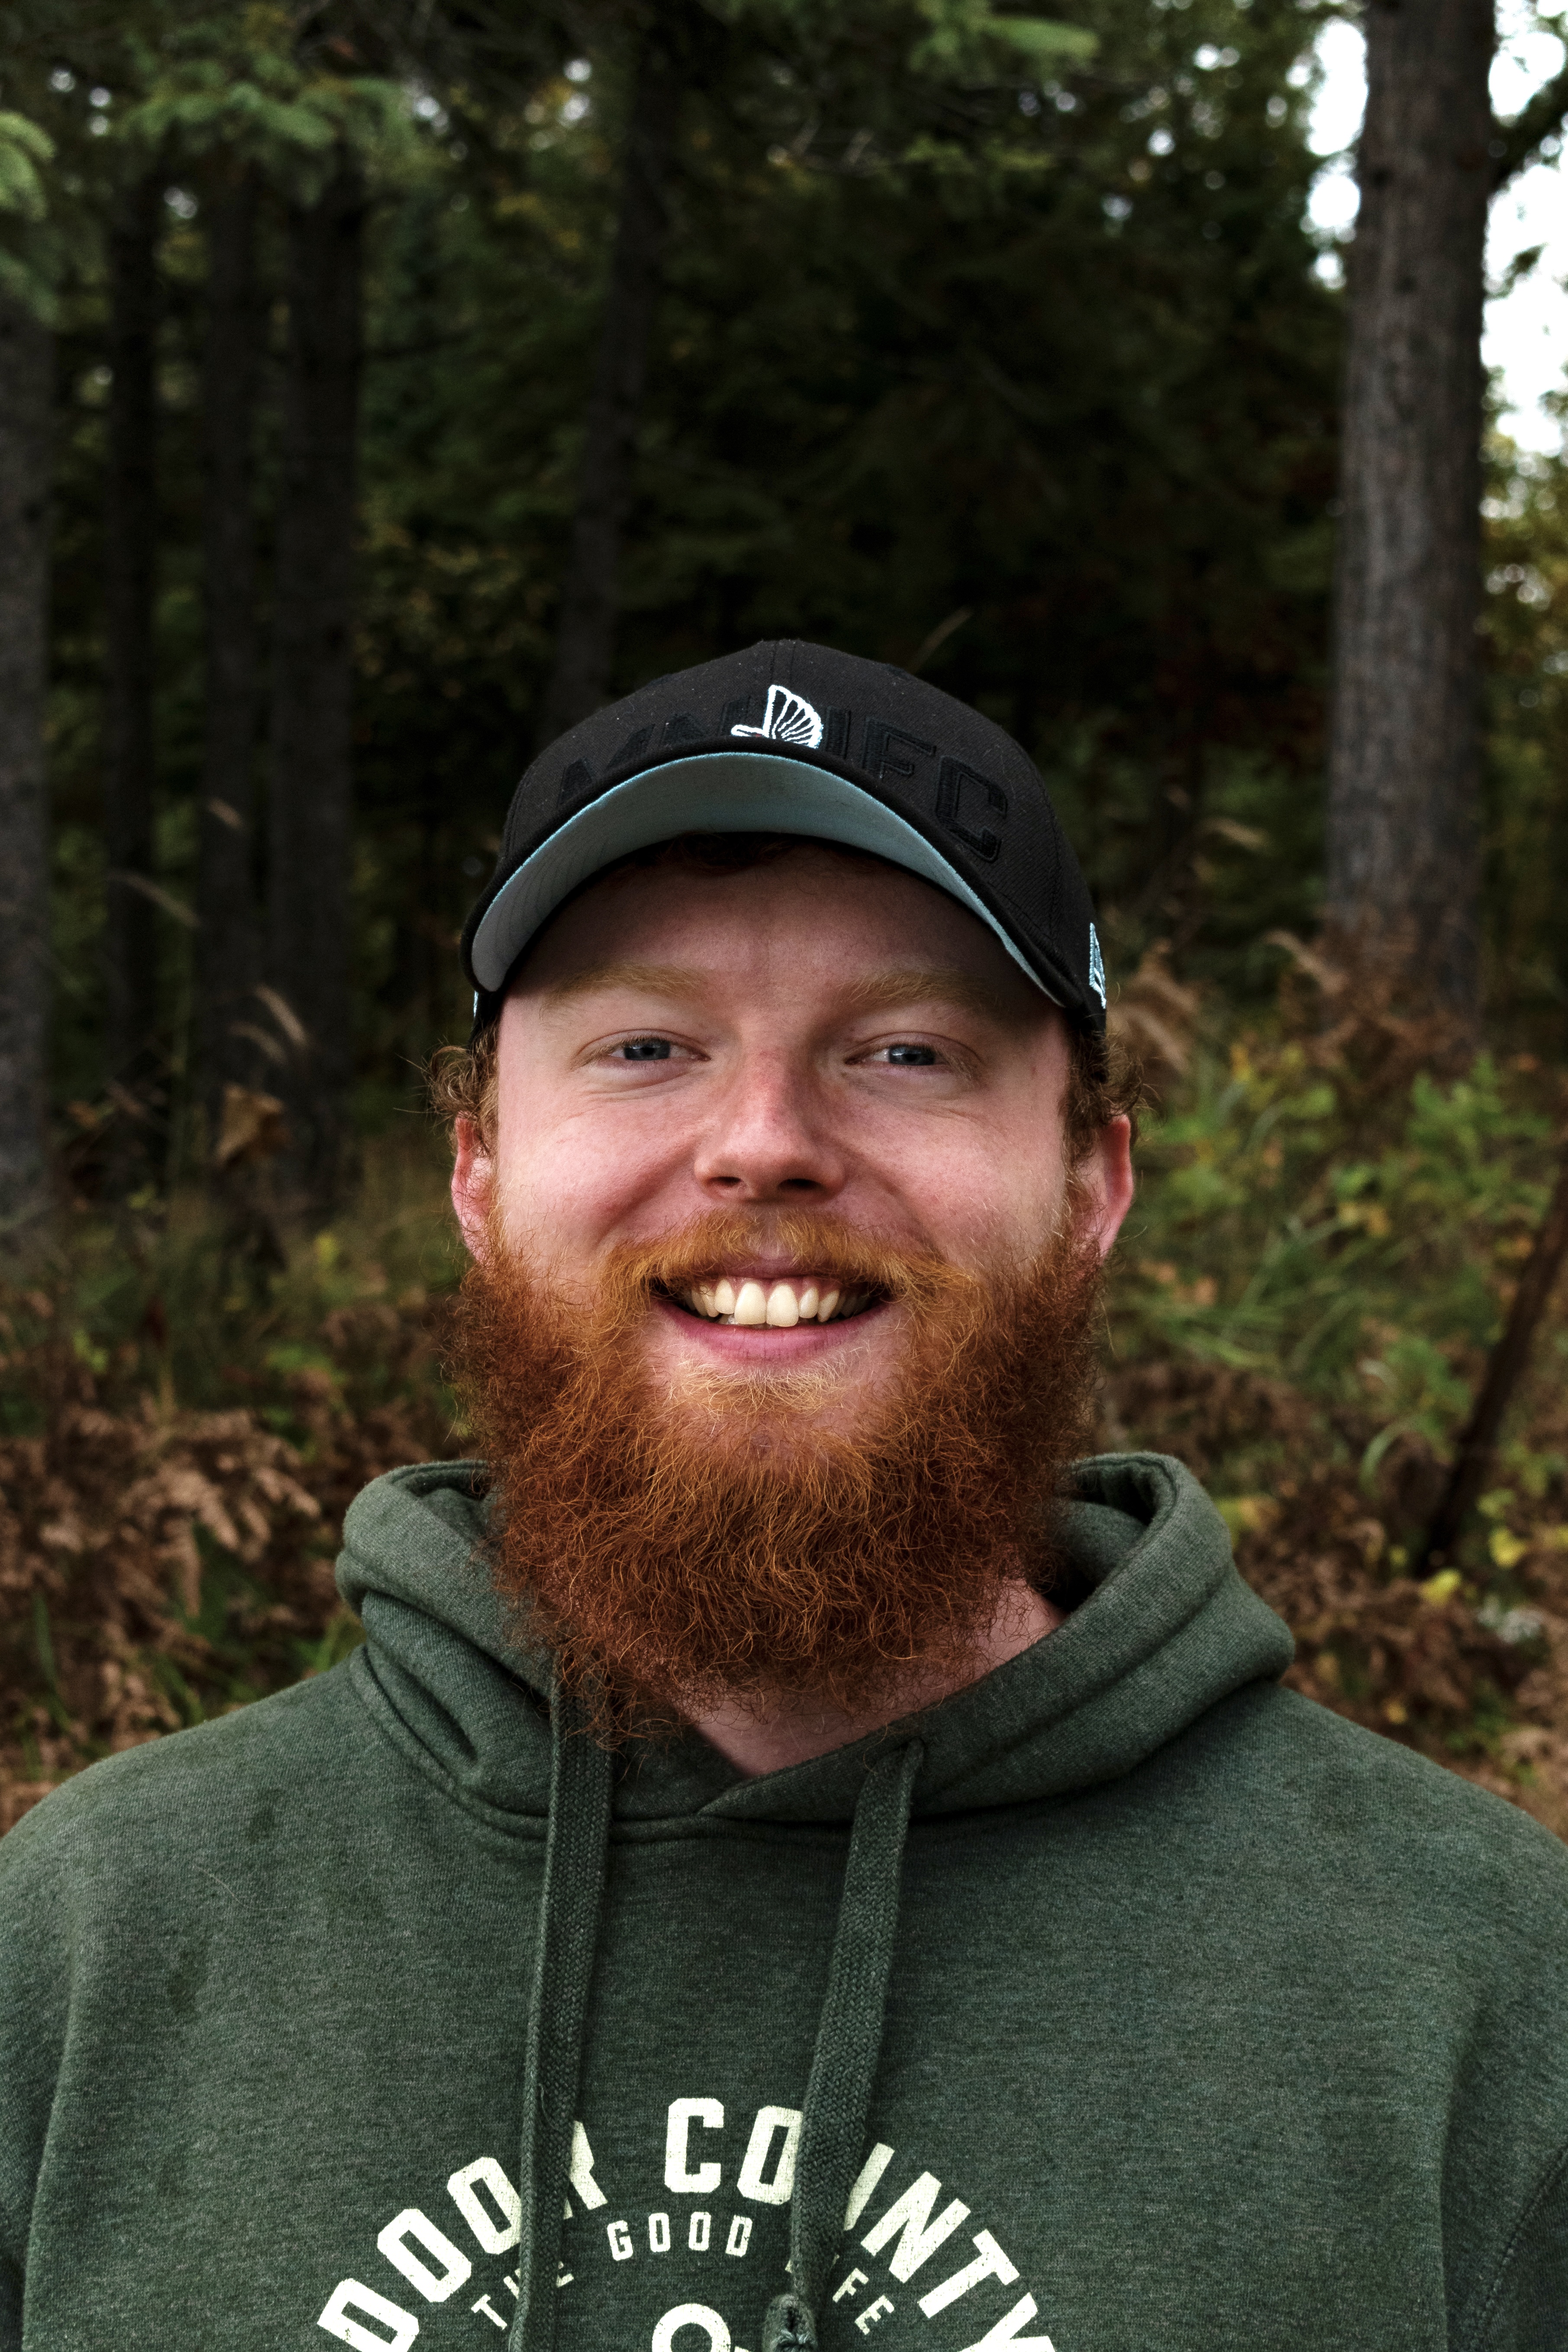 A smiling person with red hair and a beard is wearing a black baseball cap and a green hooded sweatshirt.